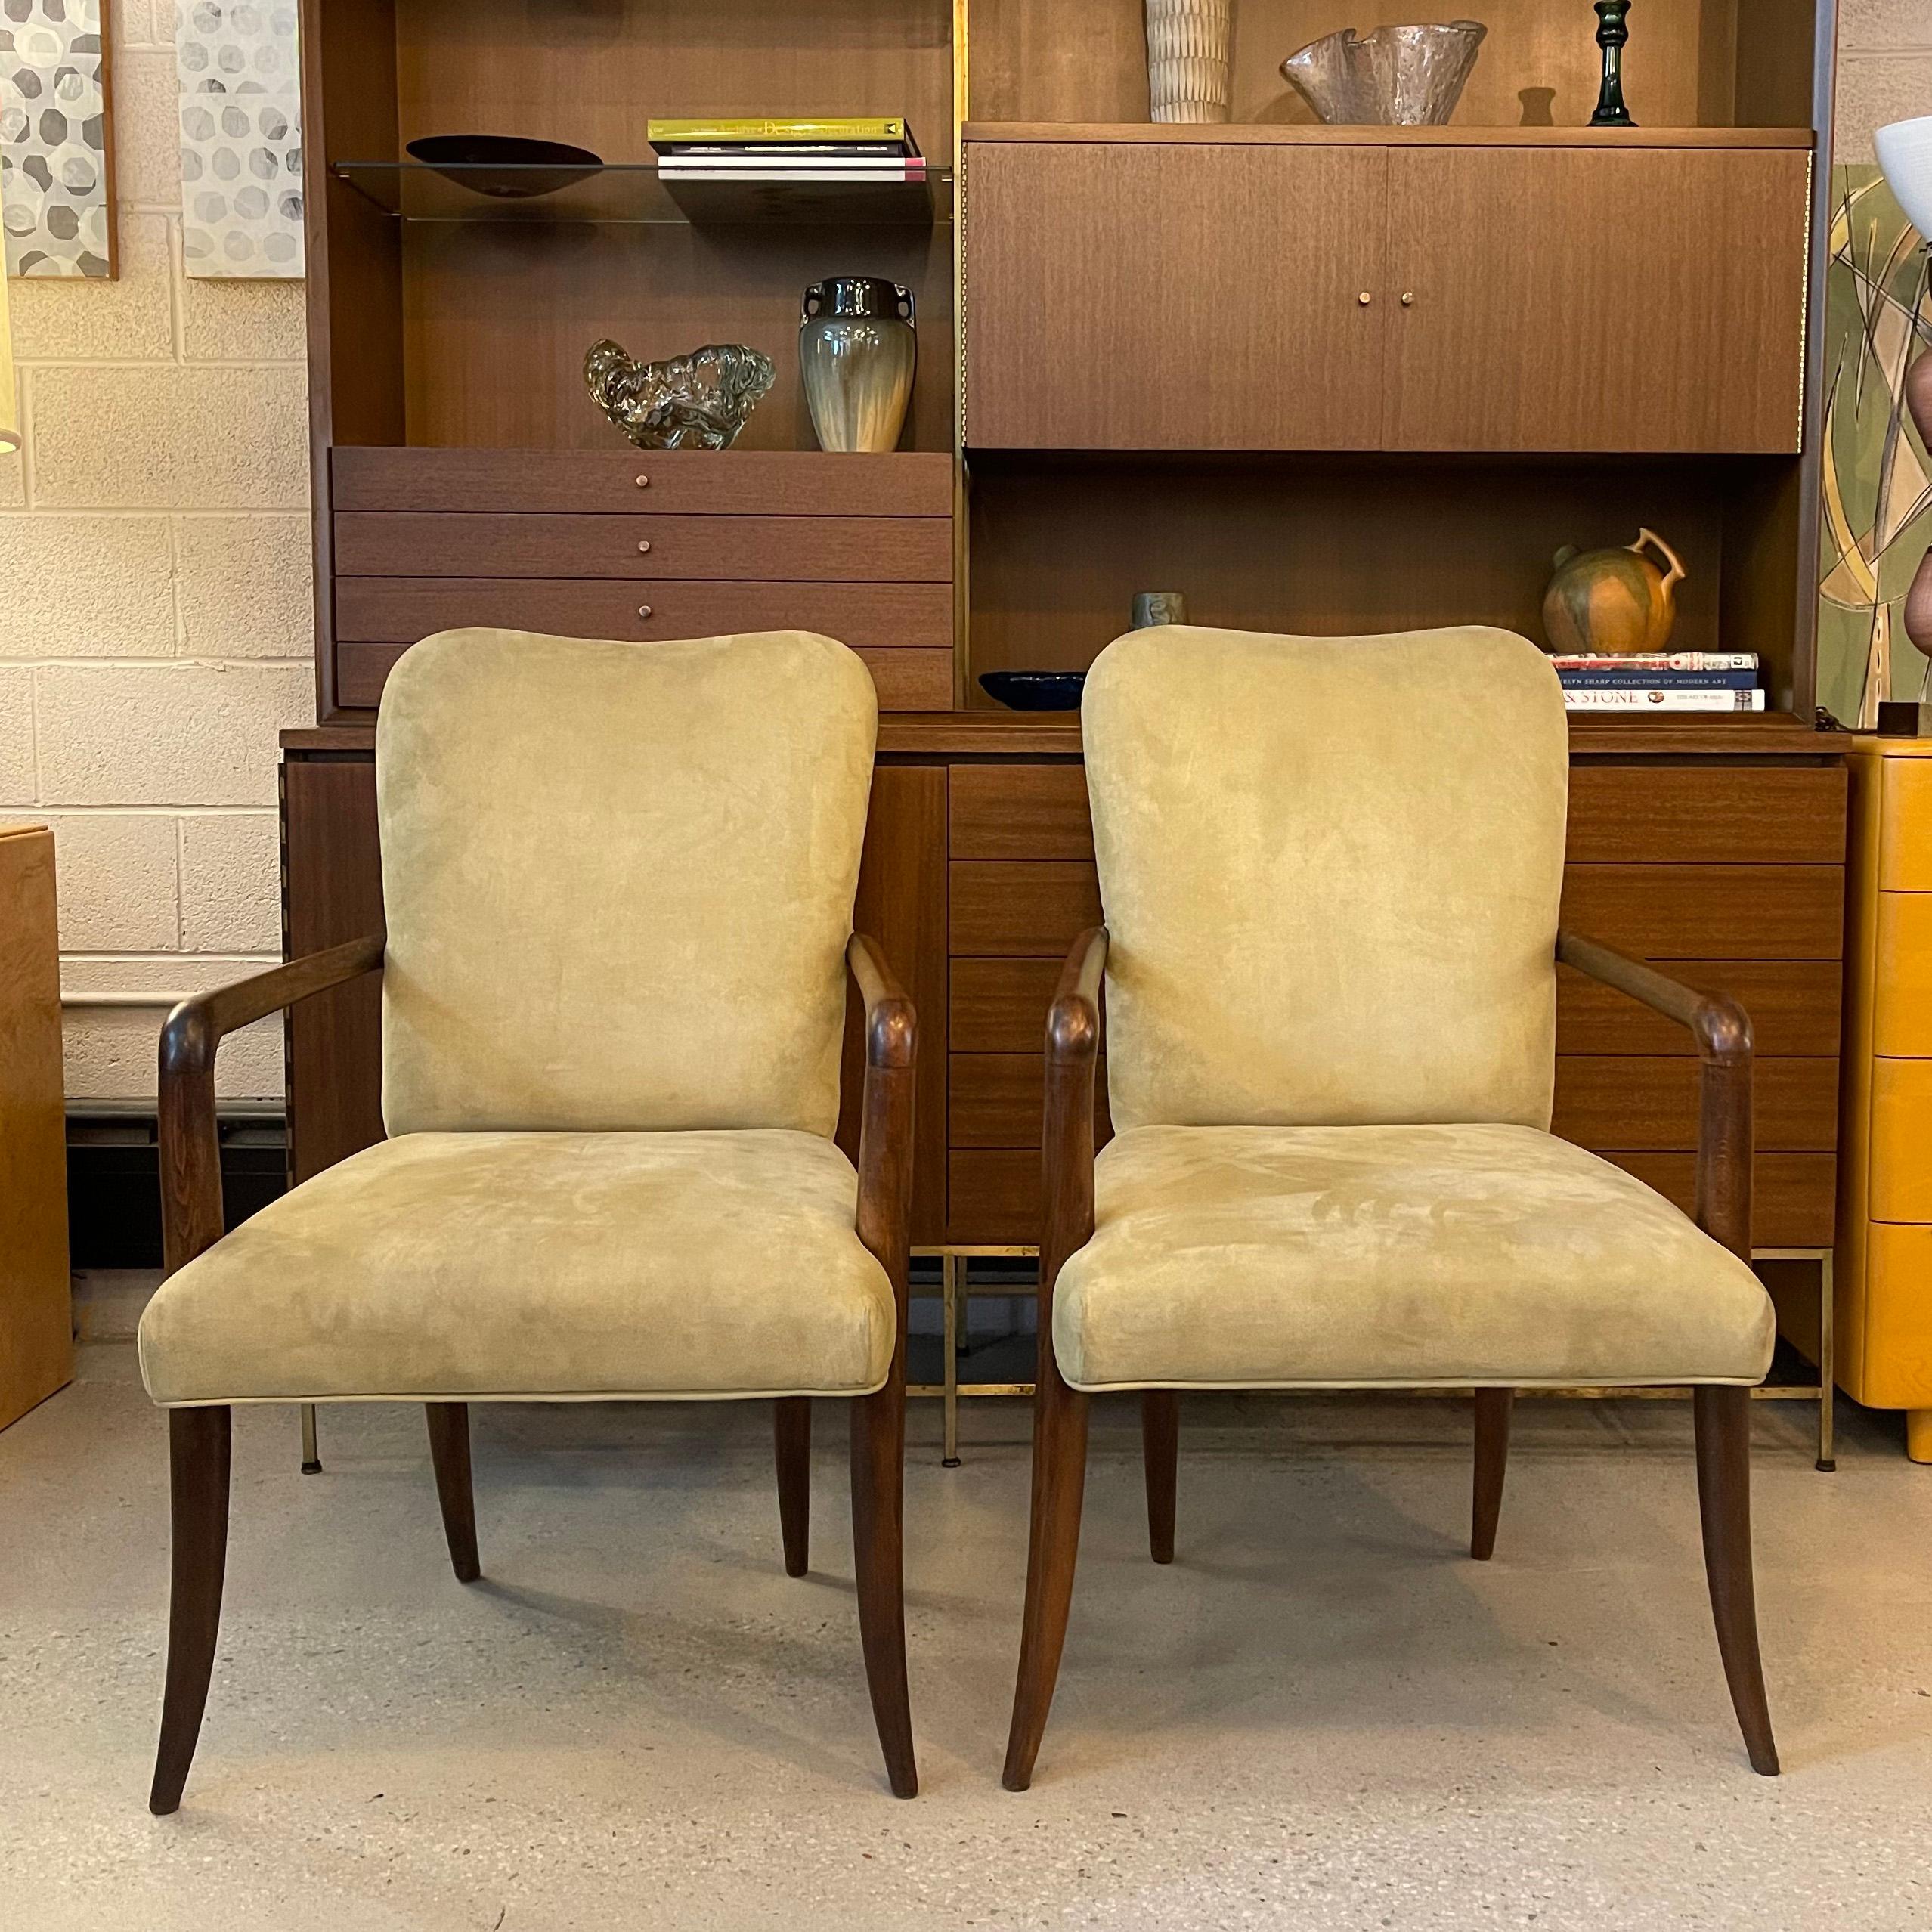 American Pair Of Mid-Century Modern UltraSuede And Oak Sabre Leg Armchairs For Sale